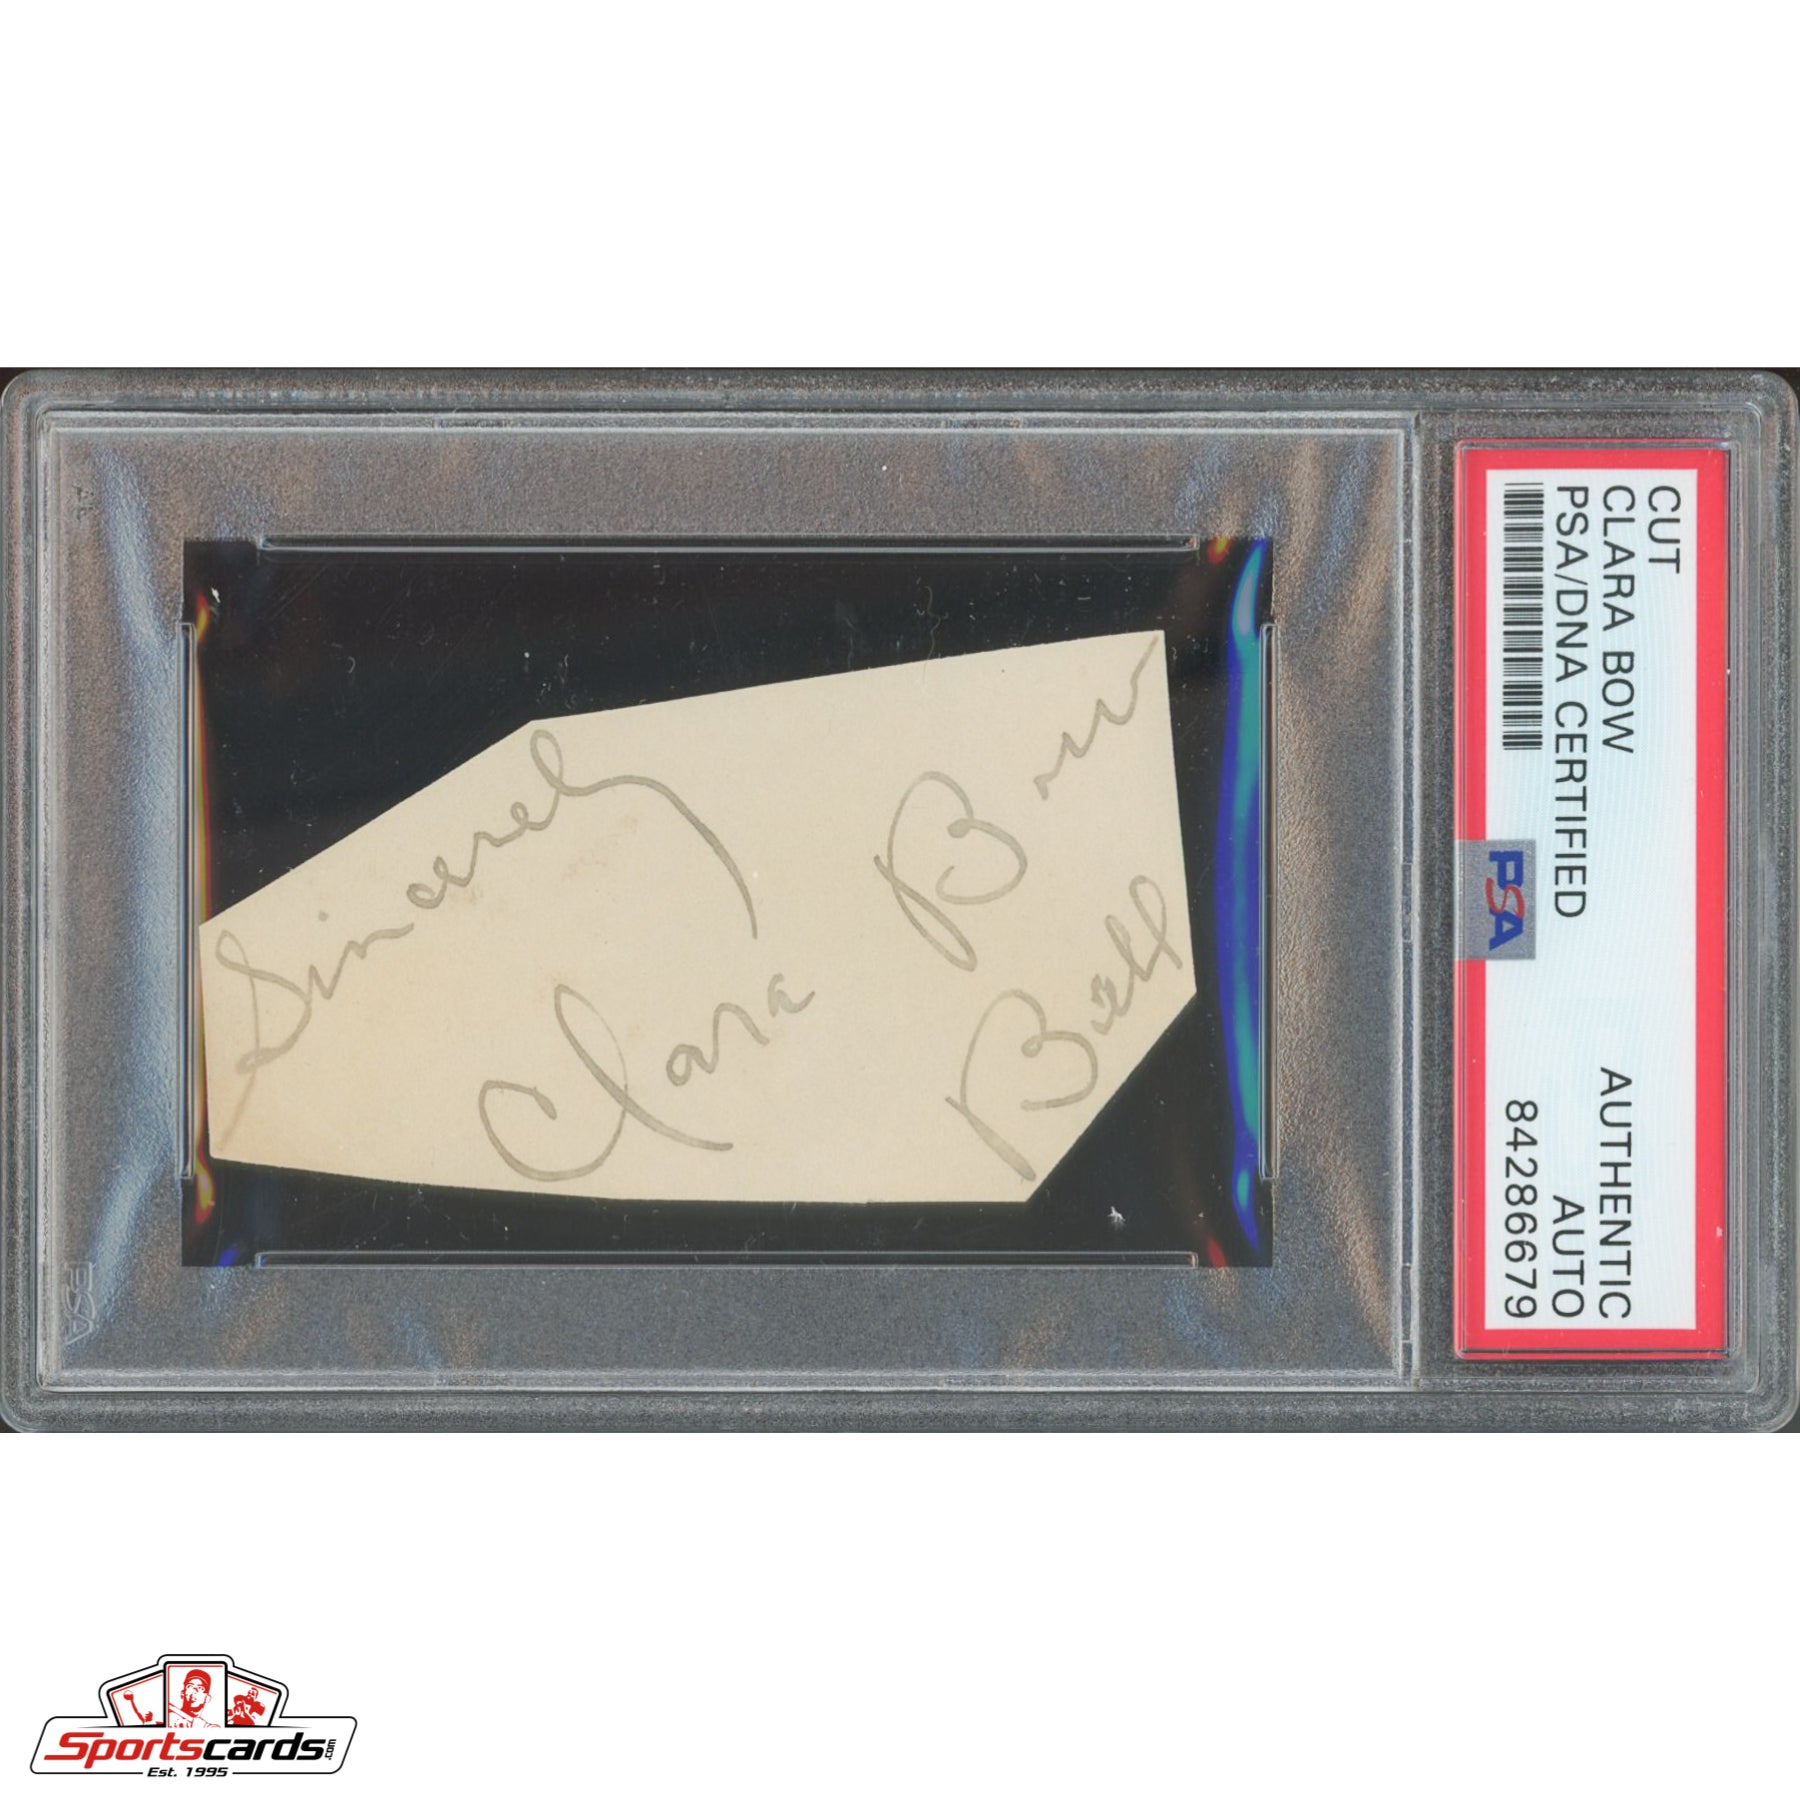 Clara Bow (D.1965) Signed Auto Cut Signature Wings It Girl Taylor Swift - PSA/DNA